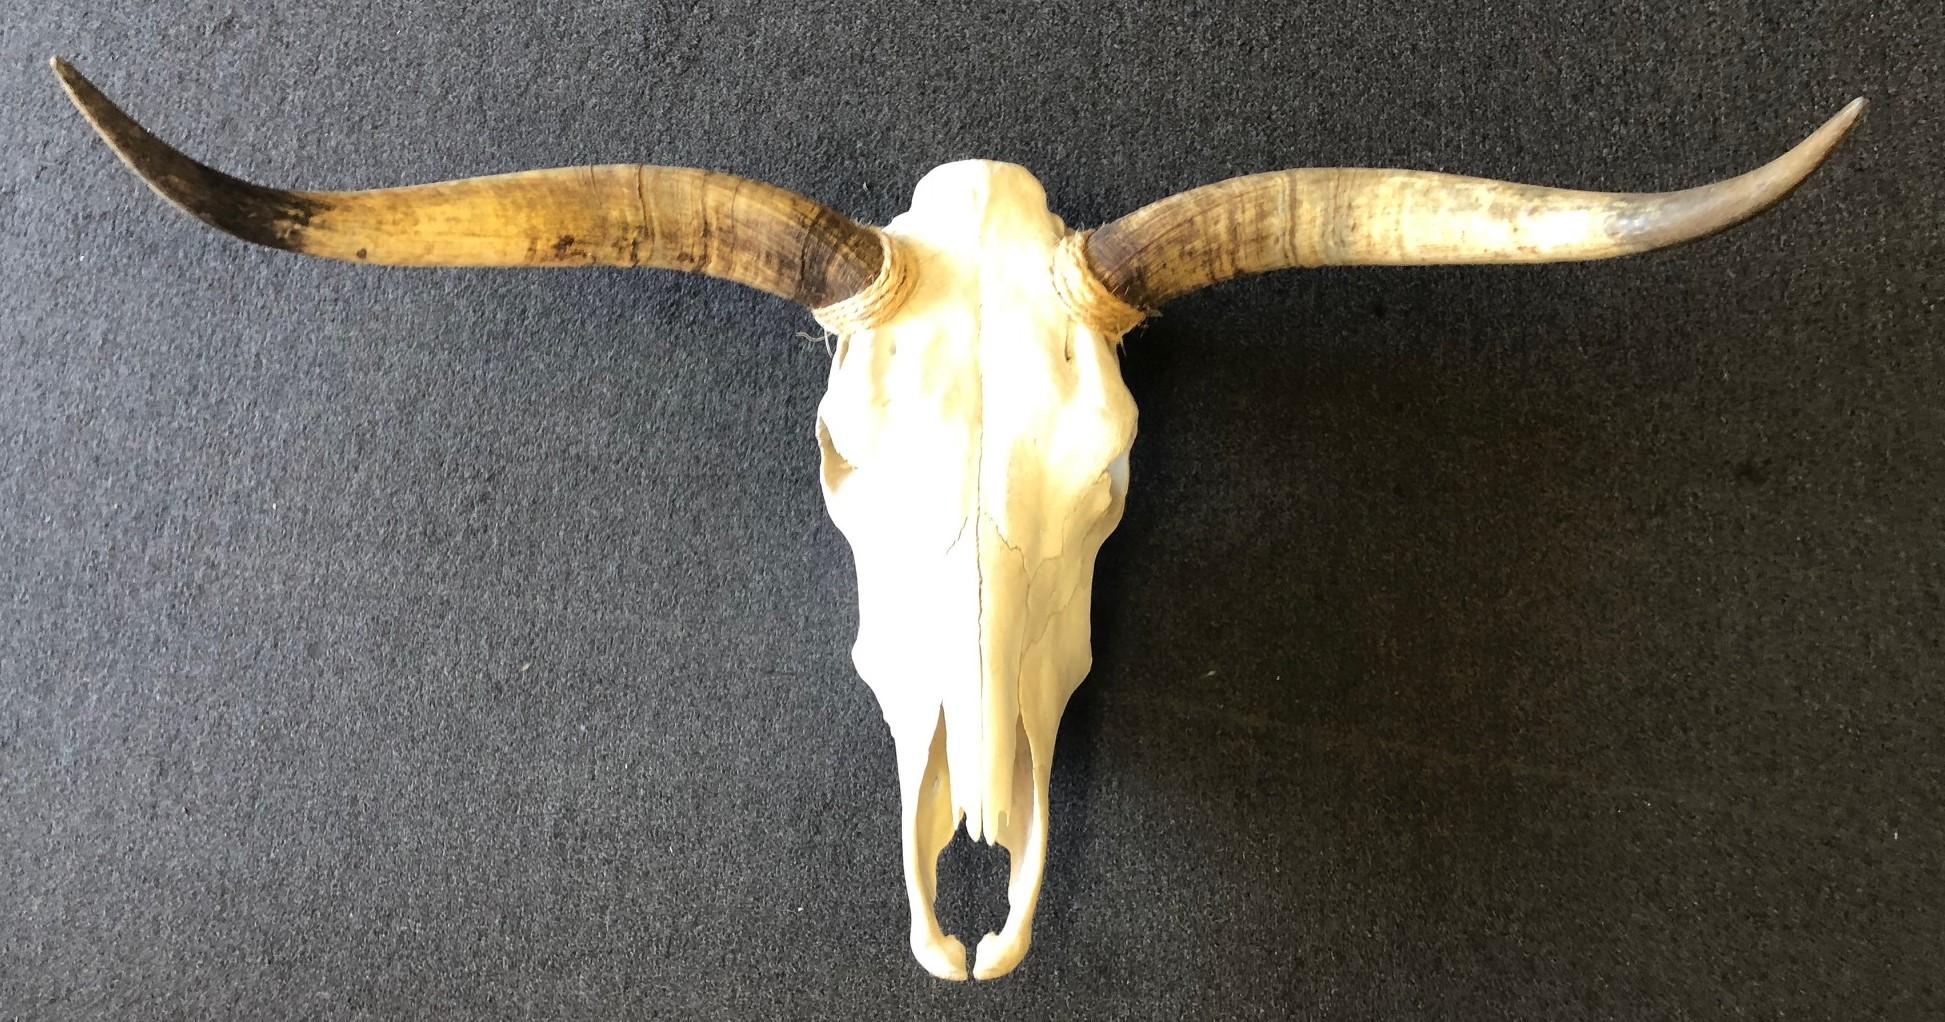 A very nice genuine longhorn skull with horns from Mexico, circa 1970s. The horns measure 36